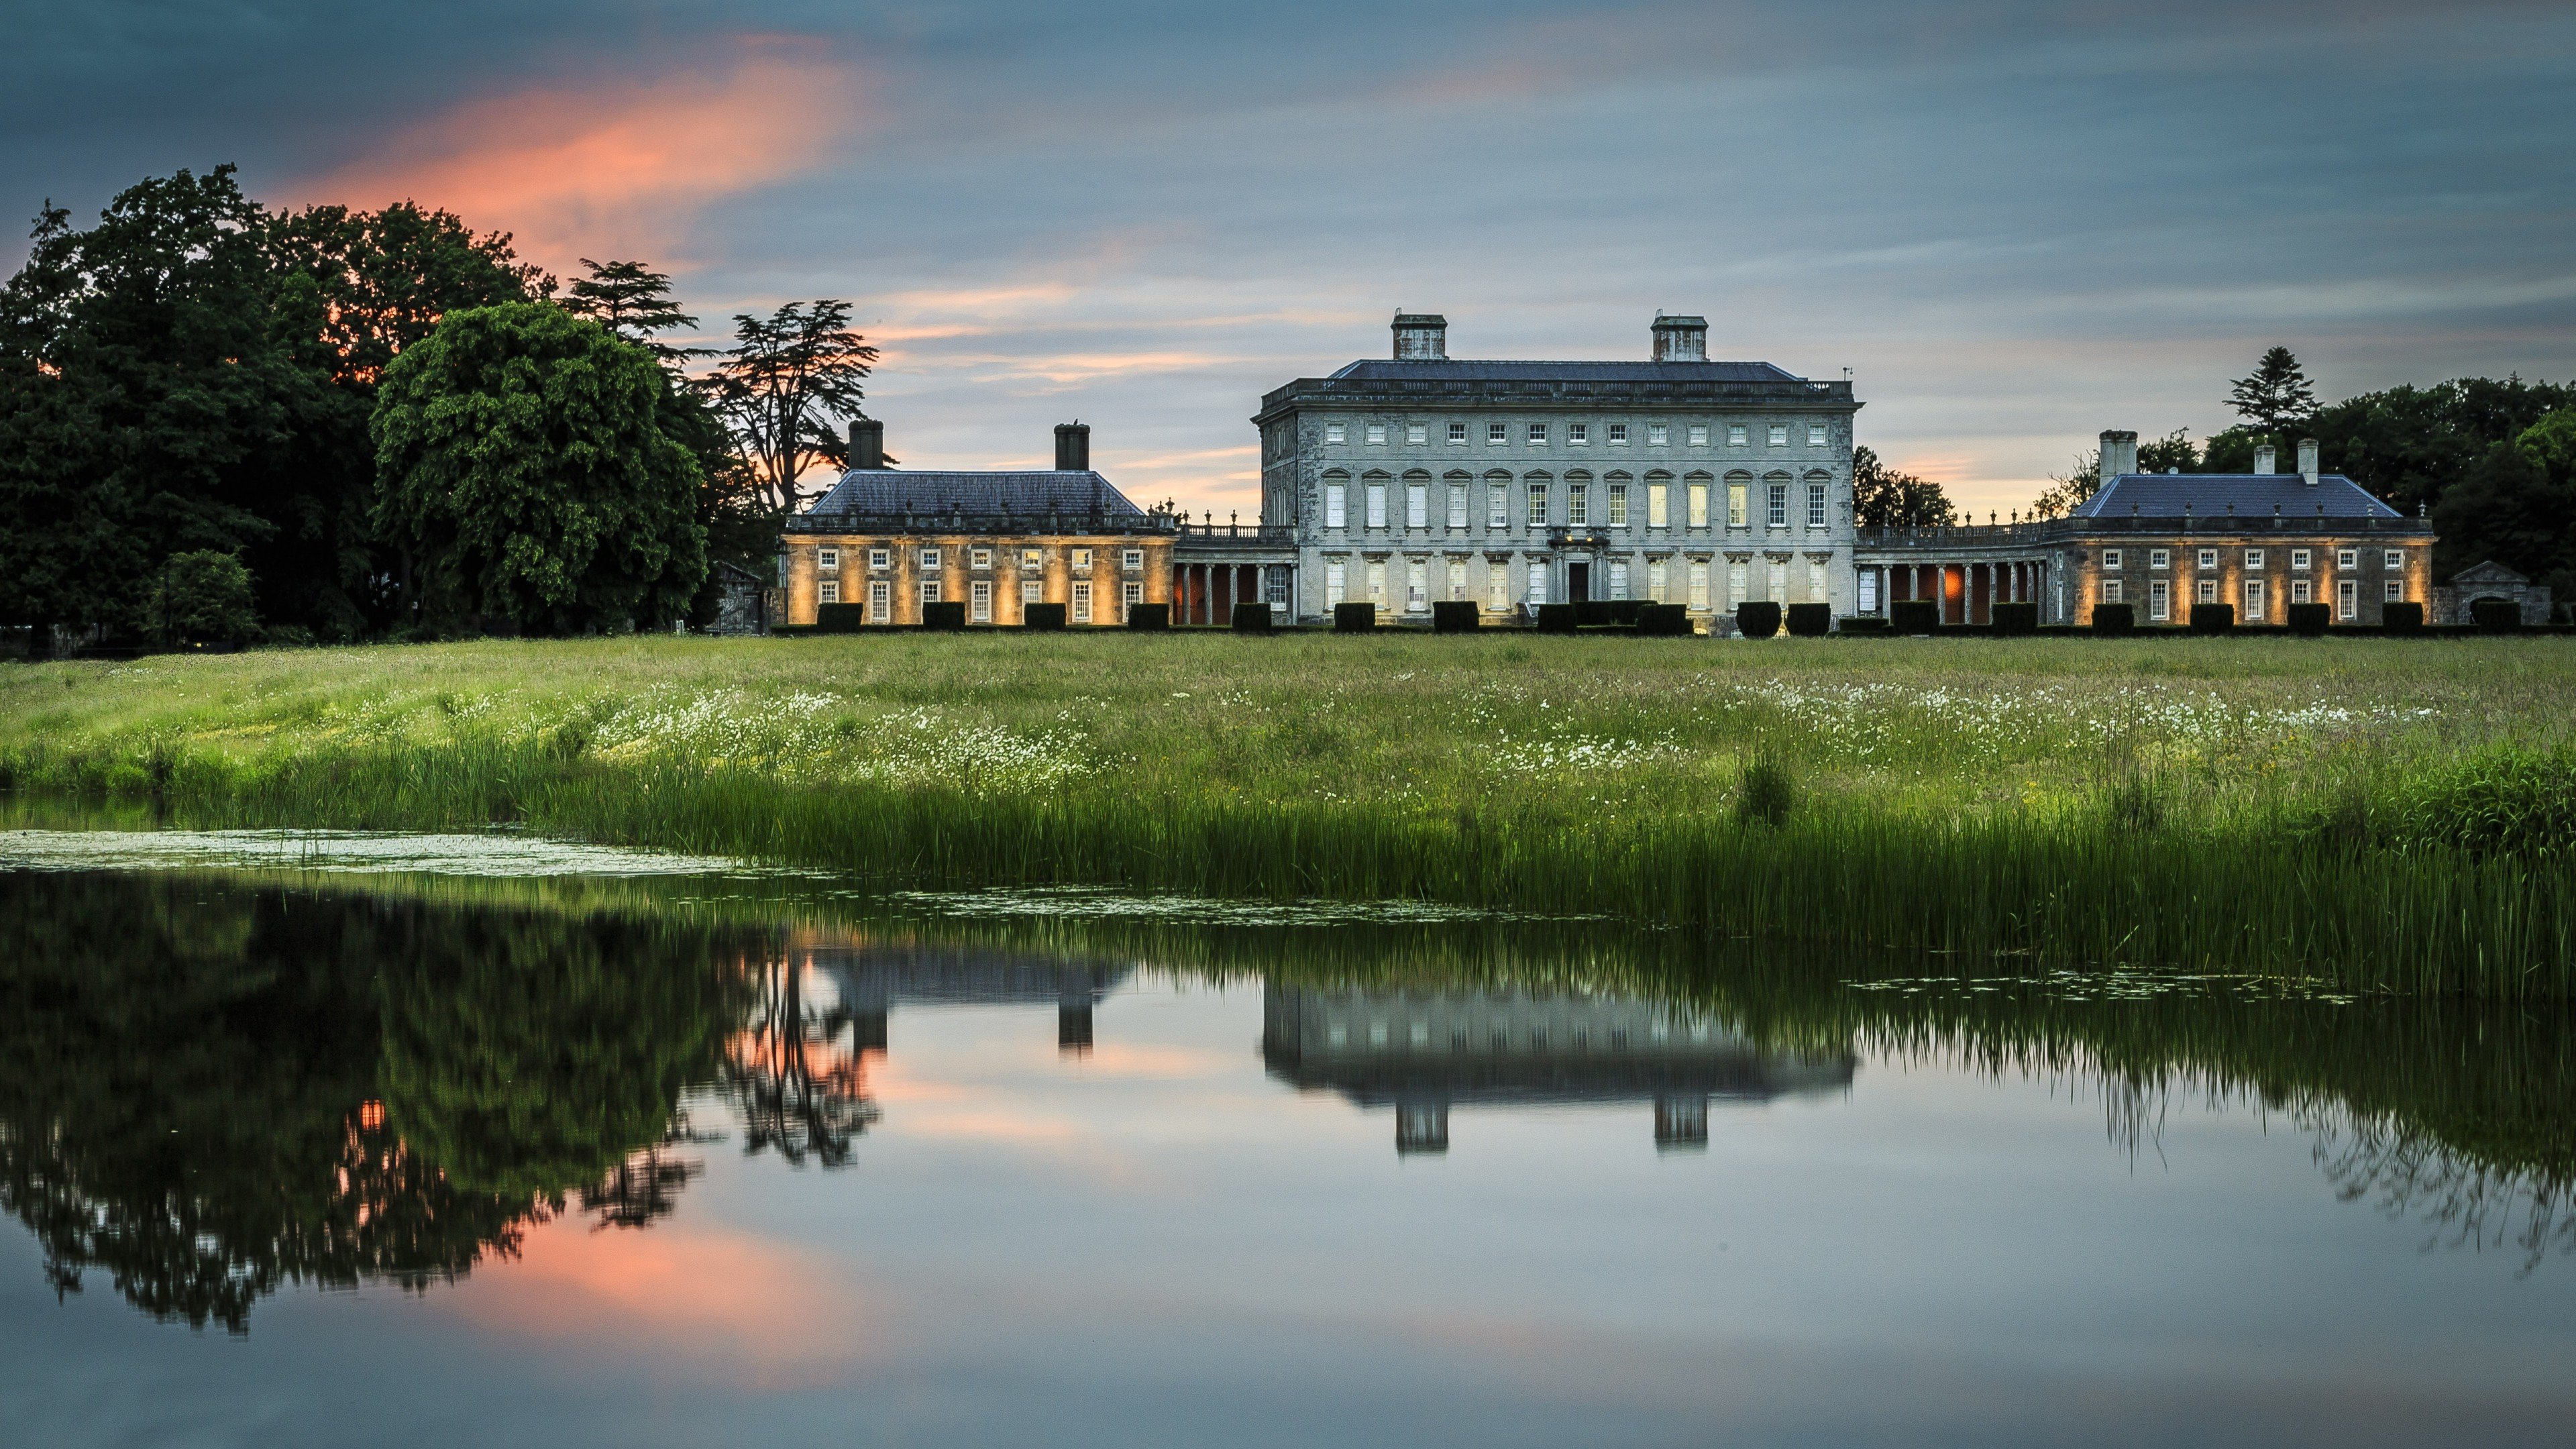 architecture, Building, Old building, Water, Ireland, Mansions, Lake, Reflection, Nature, Landscape, Sunset, Field, Trees Wallpaper